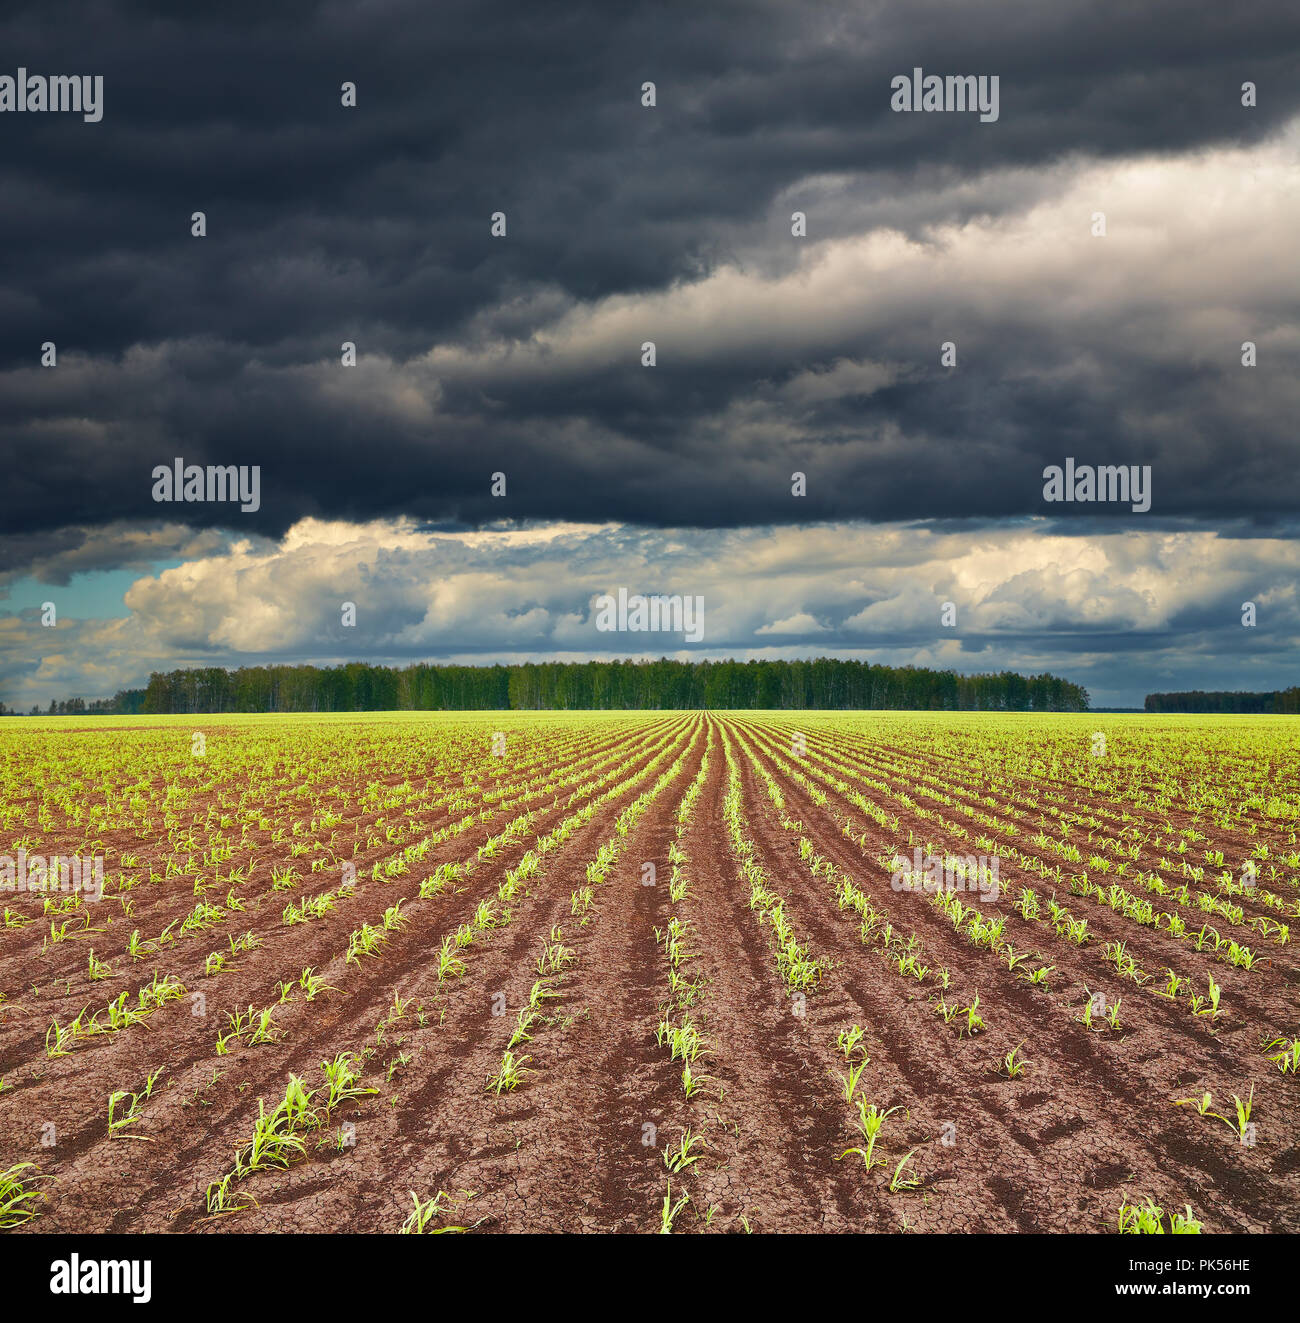 View of field with sprouting crops and storm clouds Stock Photo